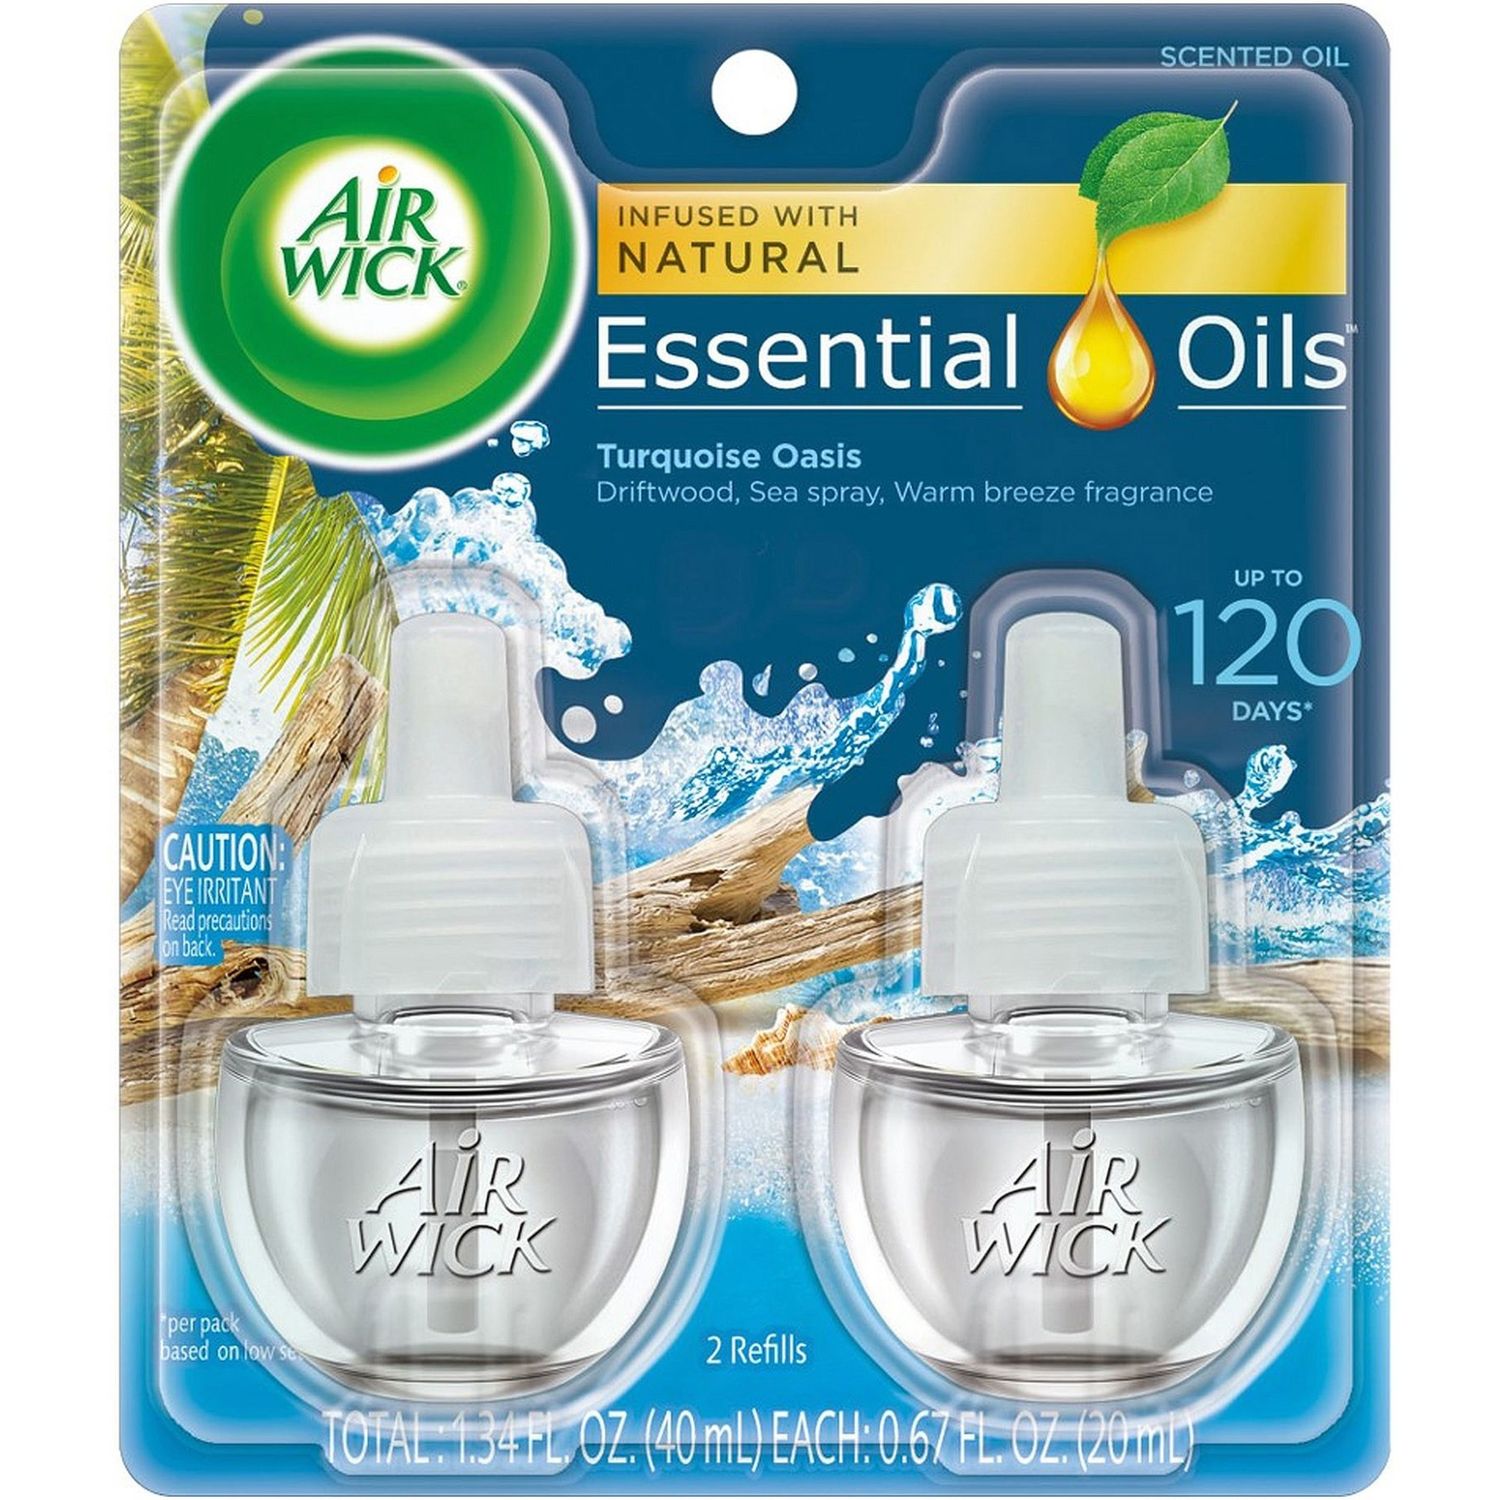 Scented Oil Warmer Refill Oil, 0.7 fl oz (0 quart), Turquoise Oasis, 60 Day, 12 / Carton, Long Lasting